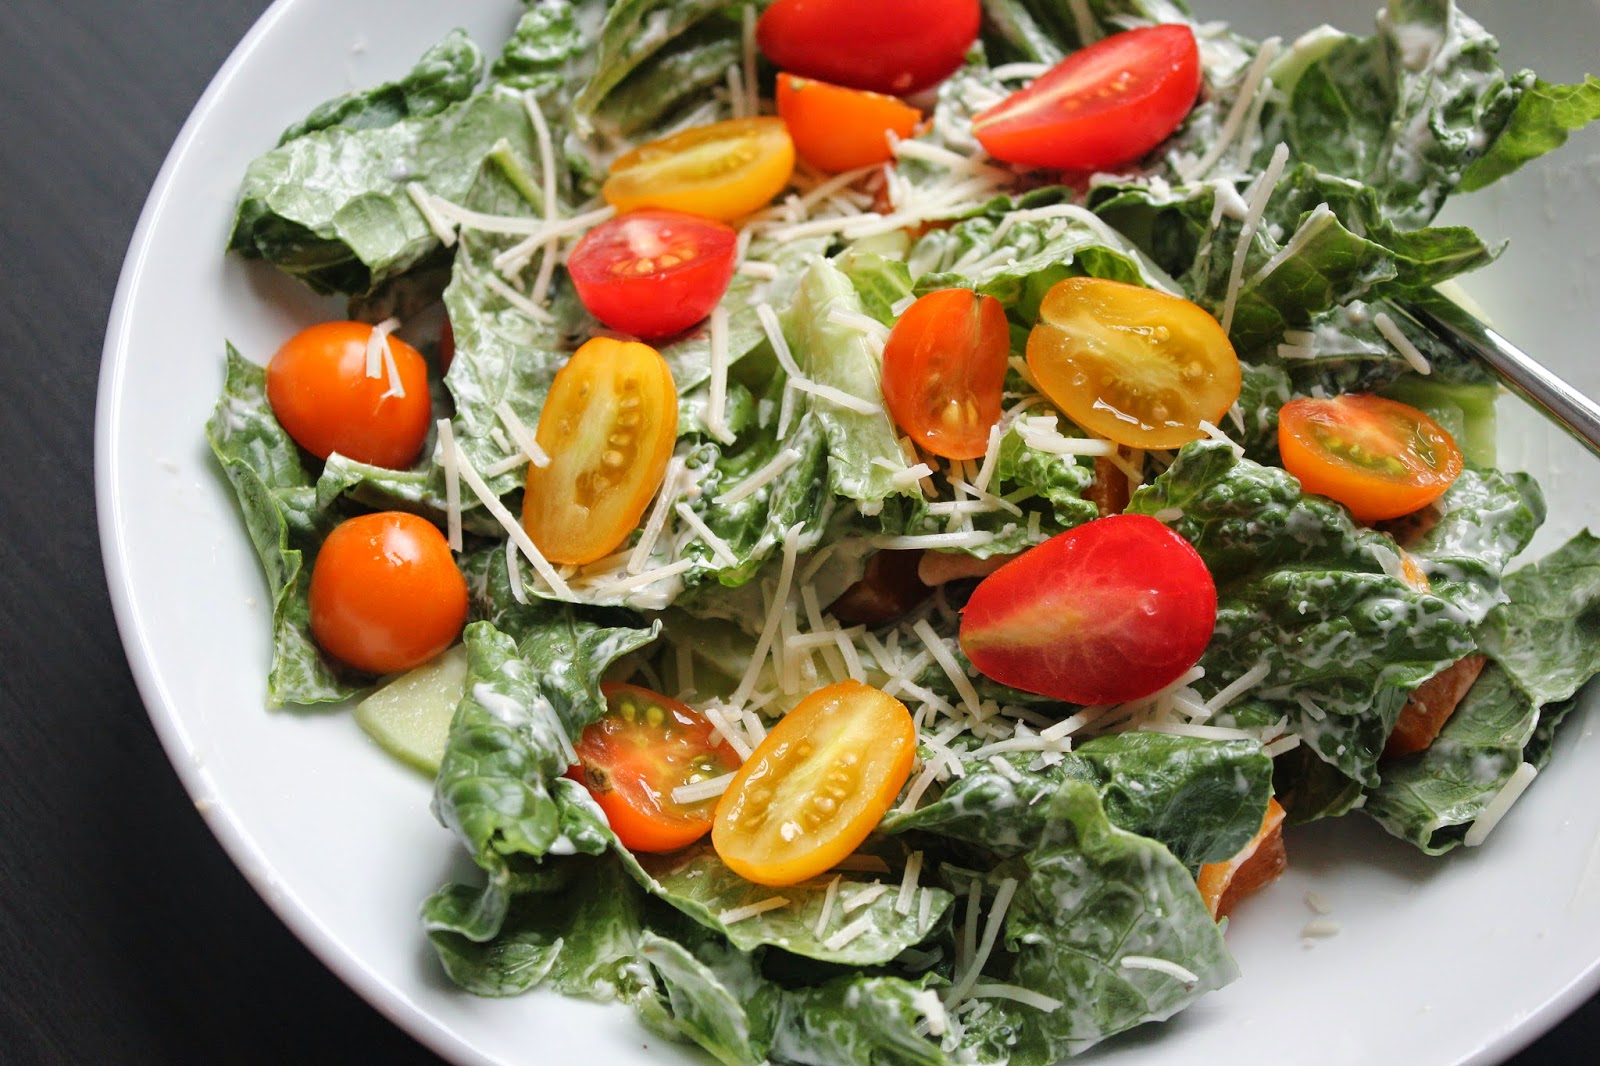 Caesar salad with tomatoes from the garden